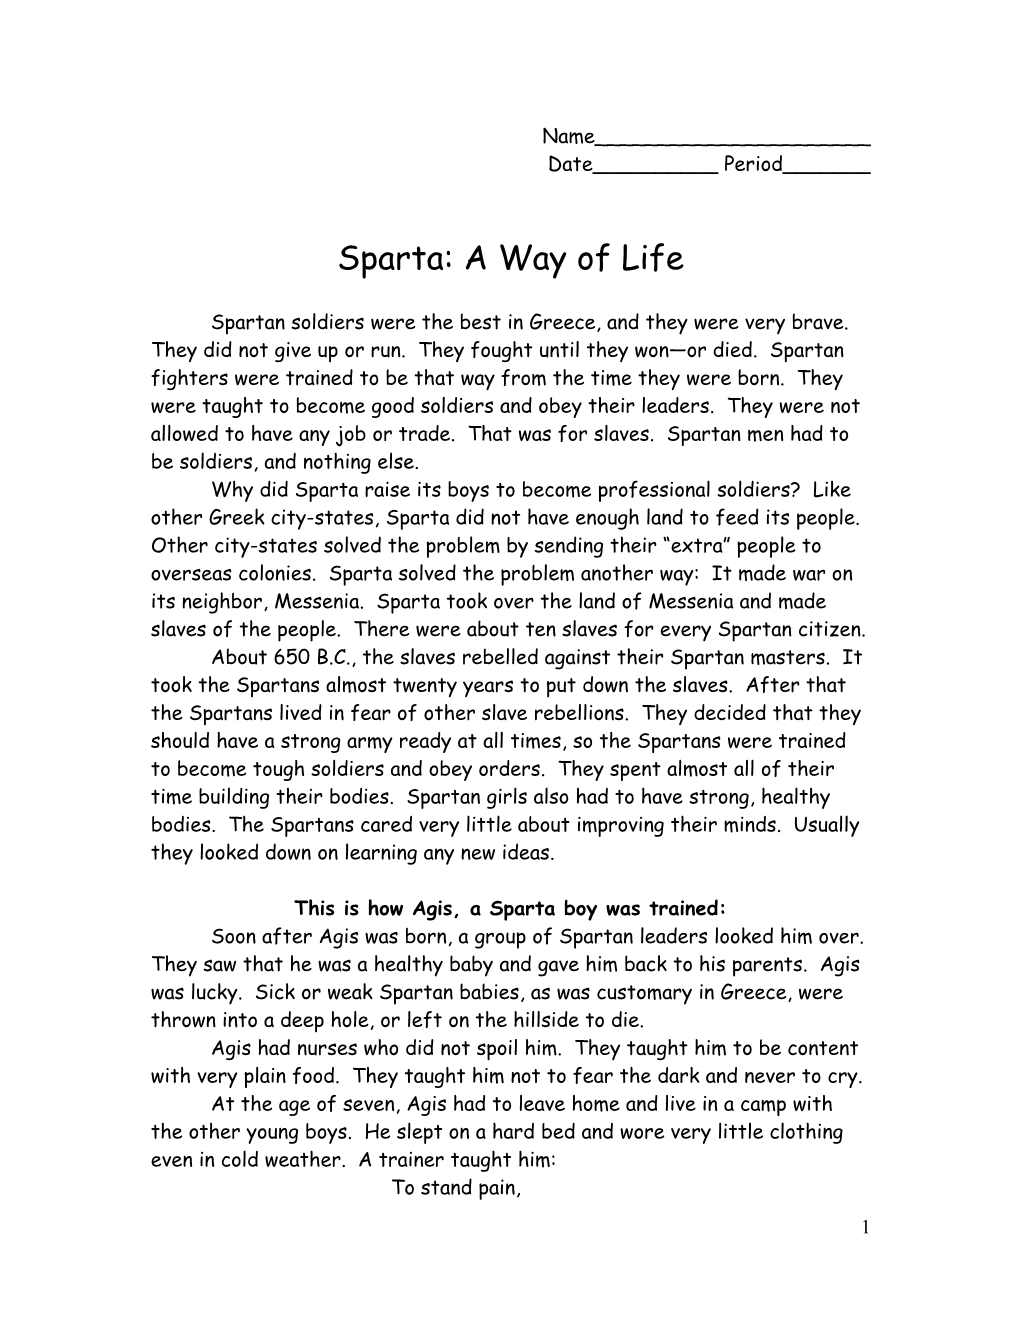 Sparta: a Way of Life